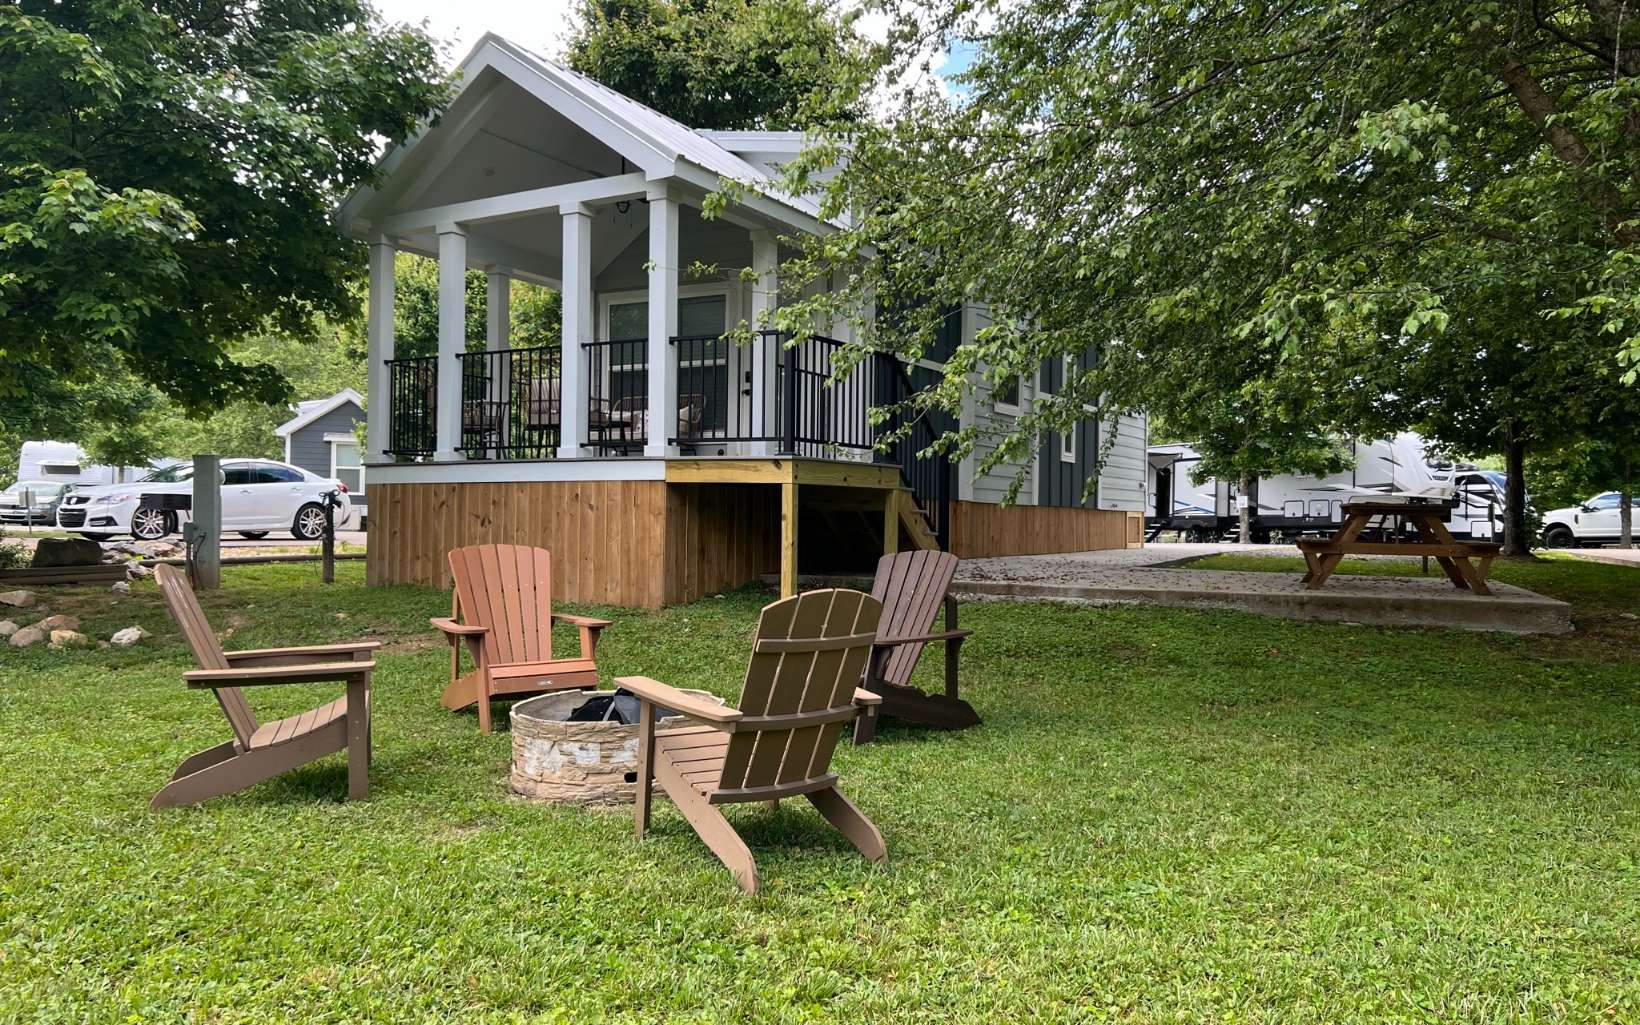 TURN-KEY Tiny Home on HEMPTOWN CREEK. Room to sleep and entertain up to 8, ample parking, beautiful creekside sitting area with firepit. Everything is included and ready to go making it great for vacation rental! Minutes from downtown Blue Ridge this gated RV and Tiny Home Community offers it all! Amenities include river access, two ponds, community water and septic, dog park, frisbee golf course, multiple fire pits, community pool and hot tub, playground, pondfront clubhouse, laundry facility, community kitchen with wood-fired pizza oven and fireplace, washrooms, and fishing dock with stocked community pond. Call the mountains your private getaway and produce income by renting your cabin while you are adventuring elsewhere!